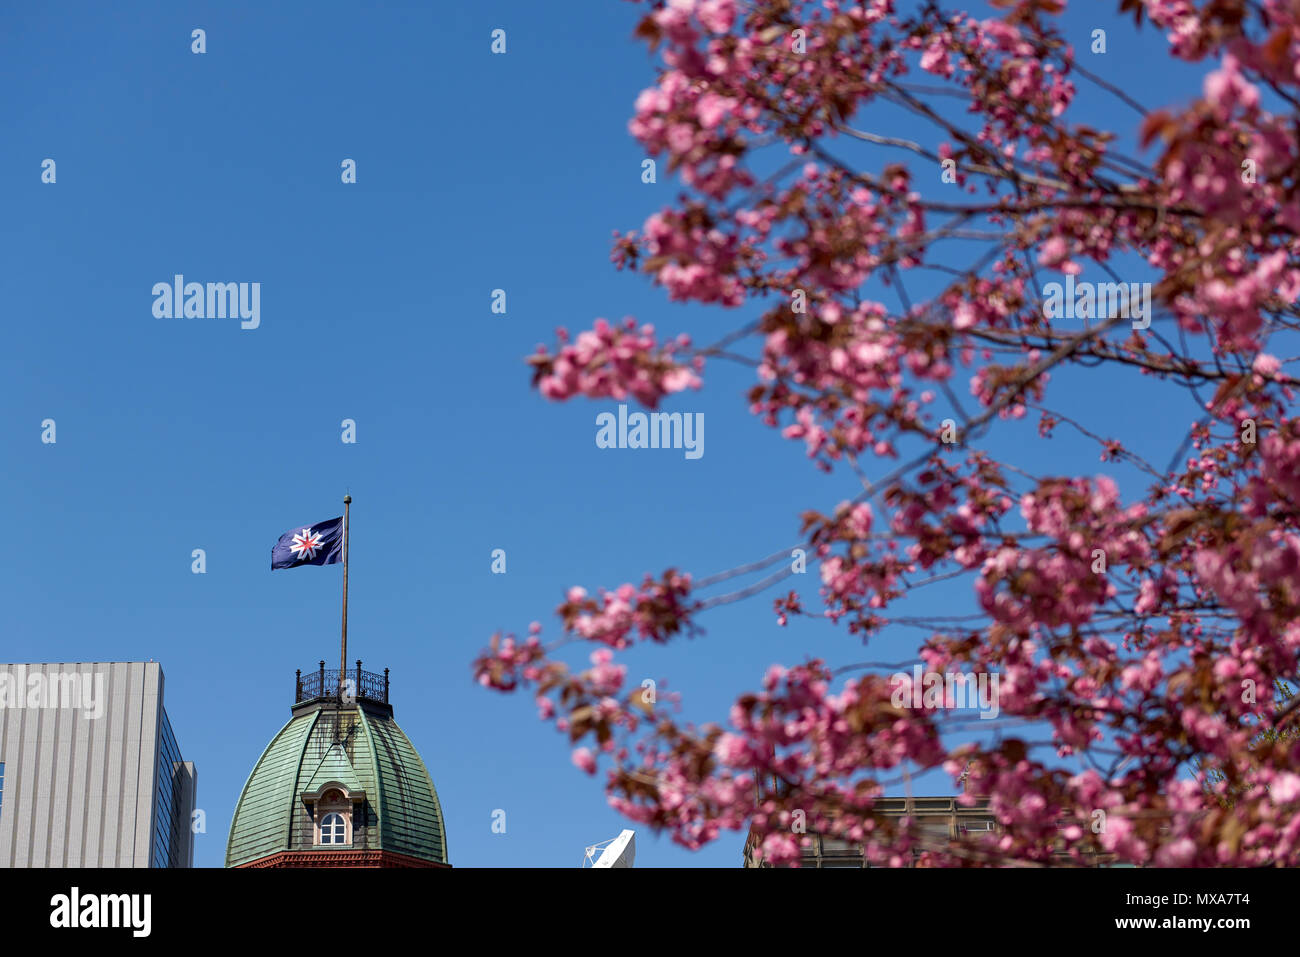 Japan's Hokkaido region flag in focus wavering atop Sapporo's Former Government Building, framed by out-of-focus cherry blossoms in the foreground. Stock Photo